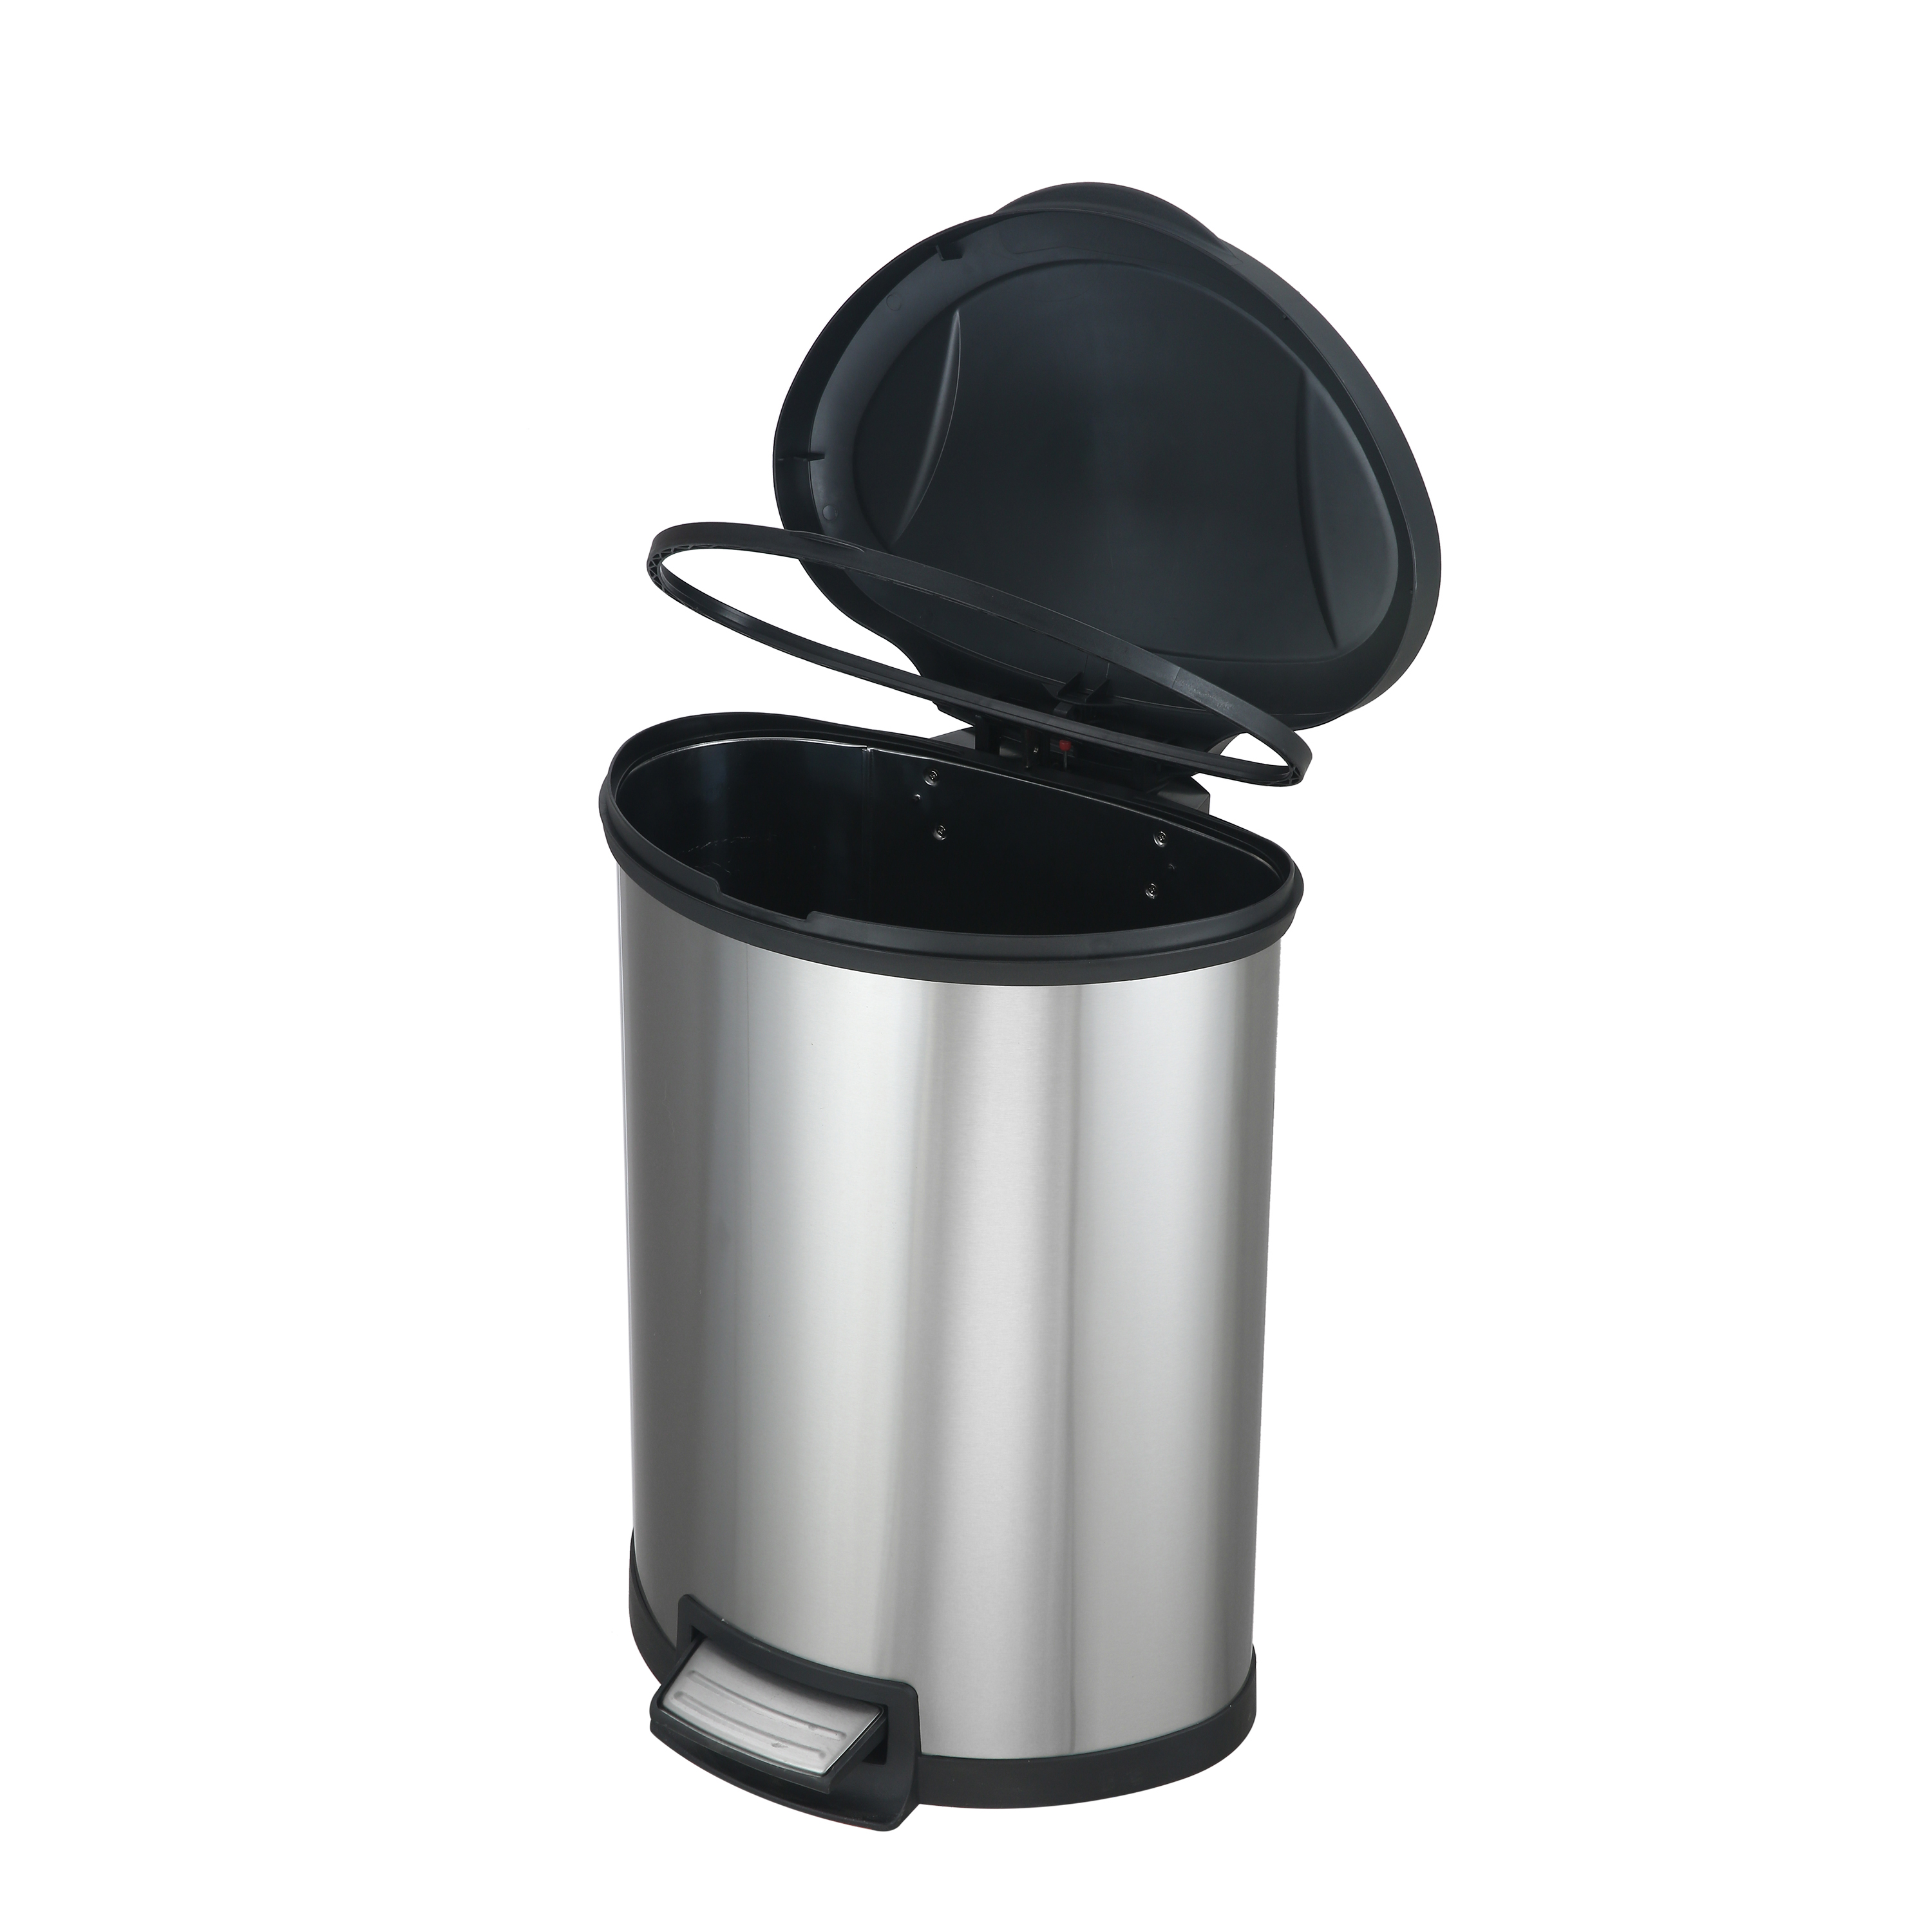 Mainstays 14.2 gal/54 Liter Stainless Steel Semi Round Kitchen Garbage Can with Lid - image 5 of 5